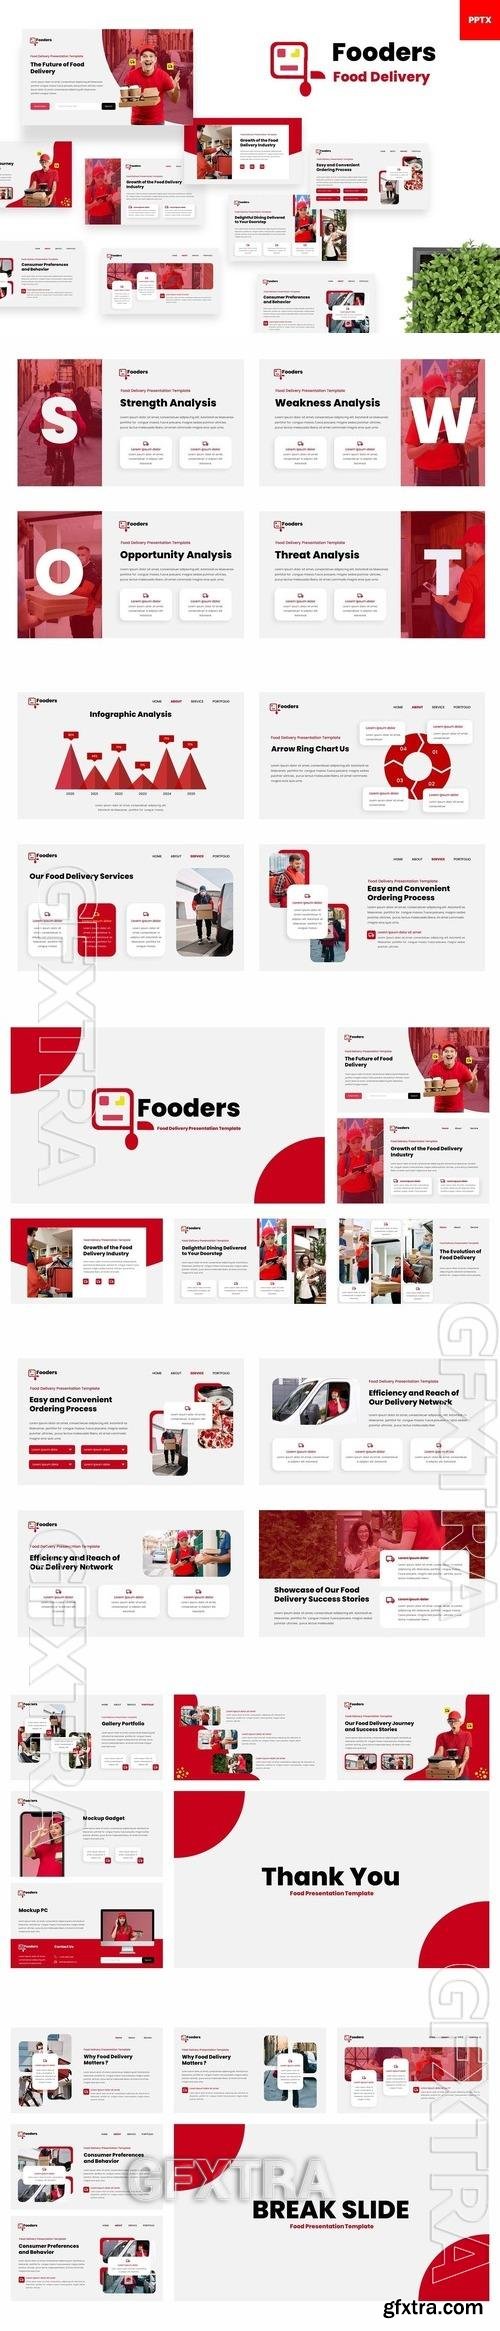 Fooders - Food Delivery PowerPoint, Keynote and Google Slides Templates